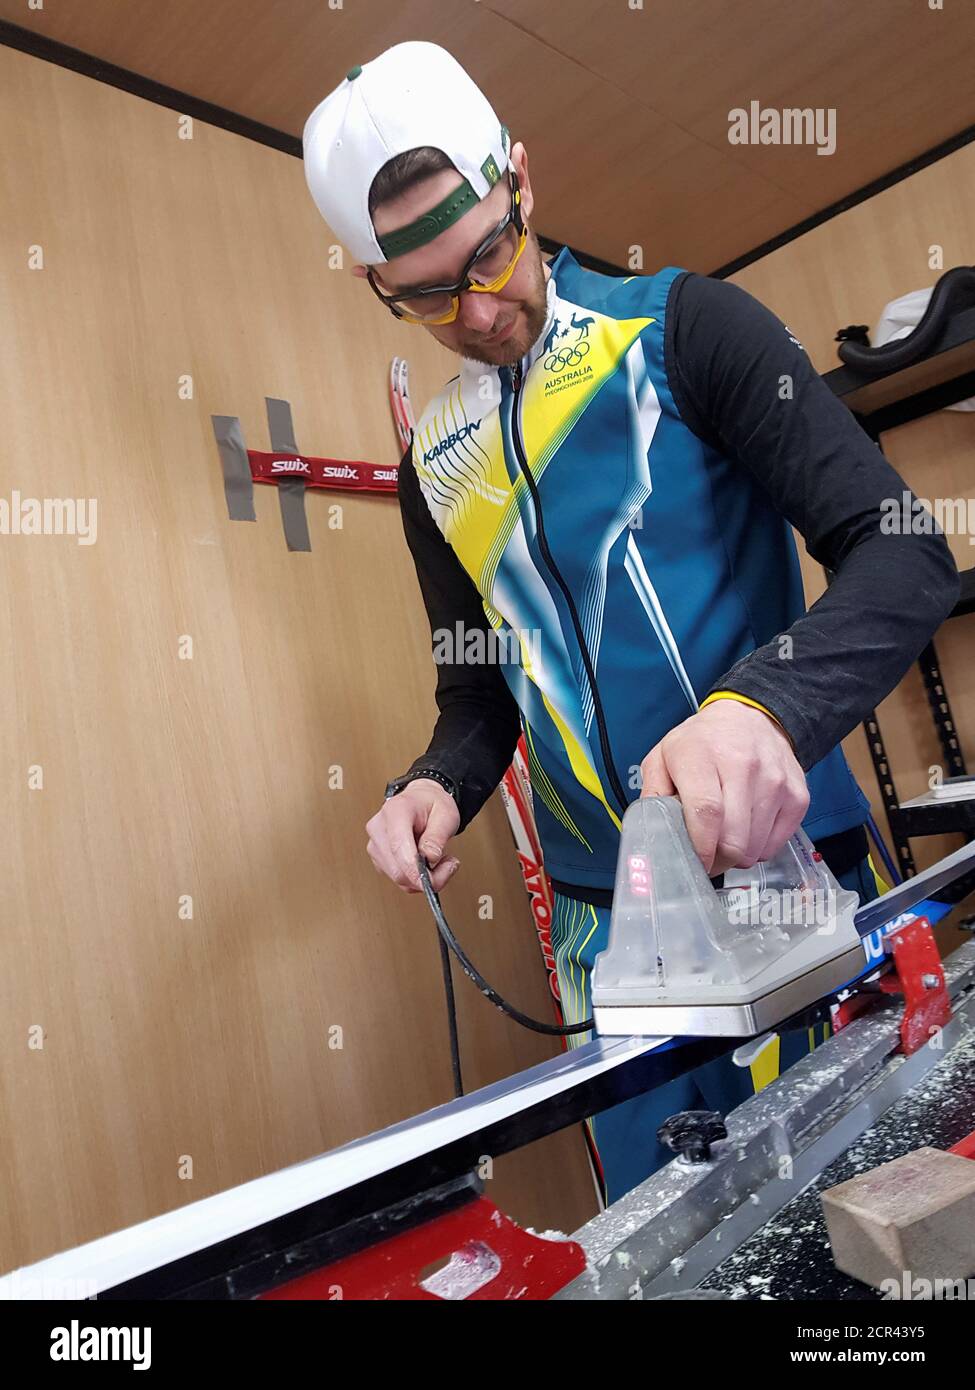 Wax technician Paul Moore of the Australian cross-country ski team works on a set of skis during the Pyeongchang 2018 Winter Olympics, in Pyeongchang, South Korea, February 20, 2018. Picture taken February 20, 2018. REUTERS/Philip O'Connor Stock Photo